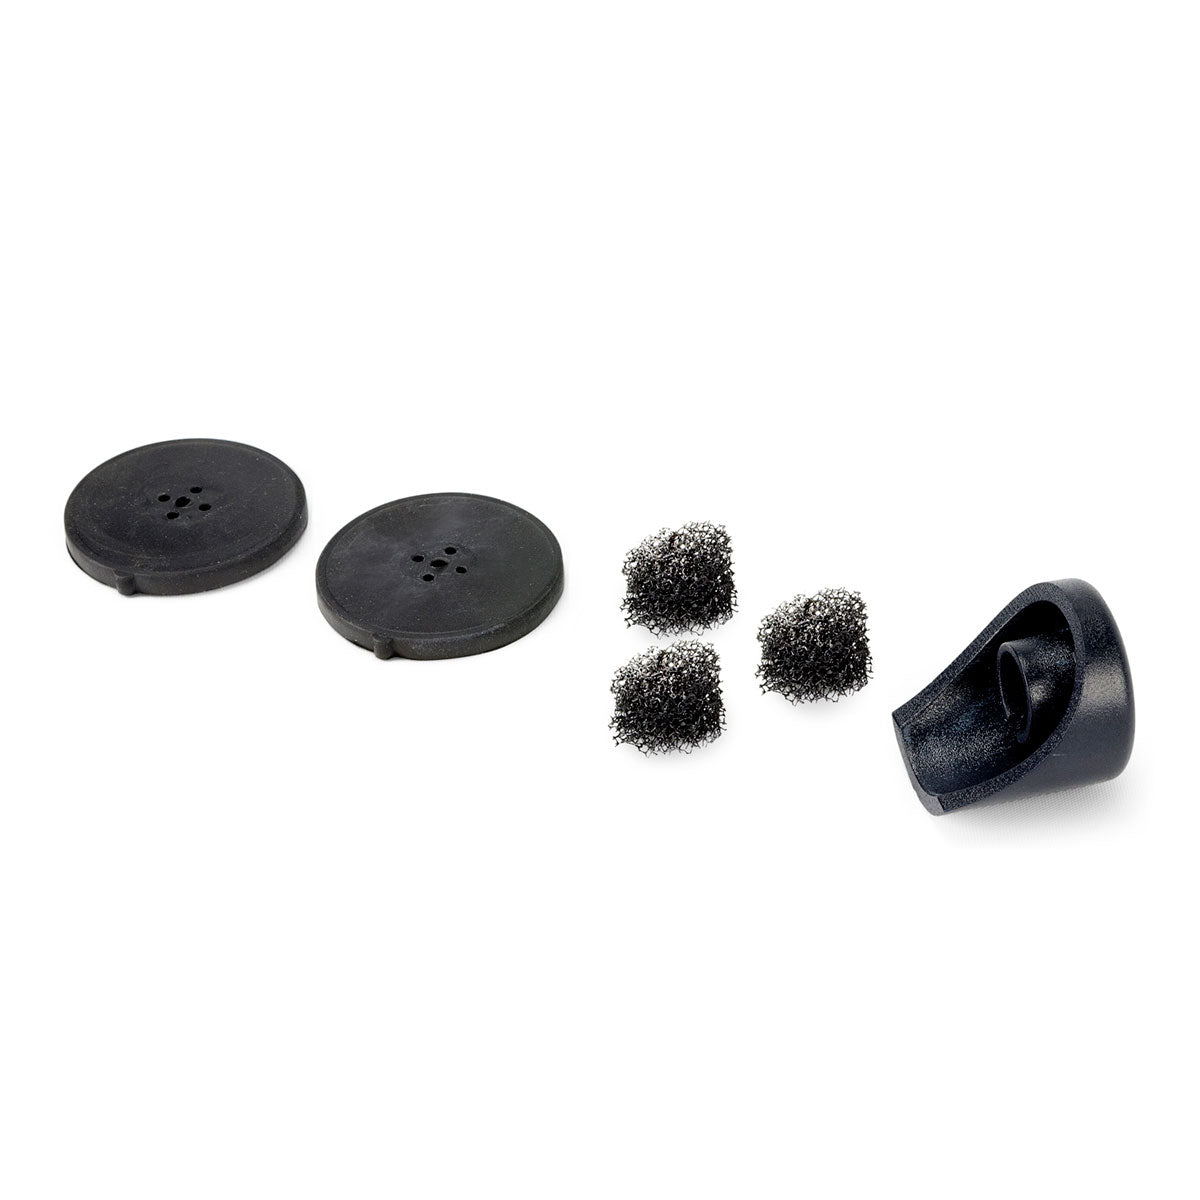 Photo of Aquascape Pond Aerator Pro Replacement Parts - Items 61009, 61008, 61000 - Marquis Gardens